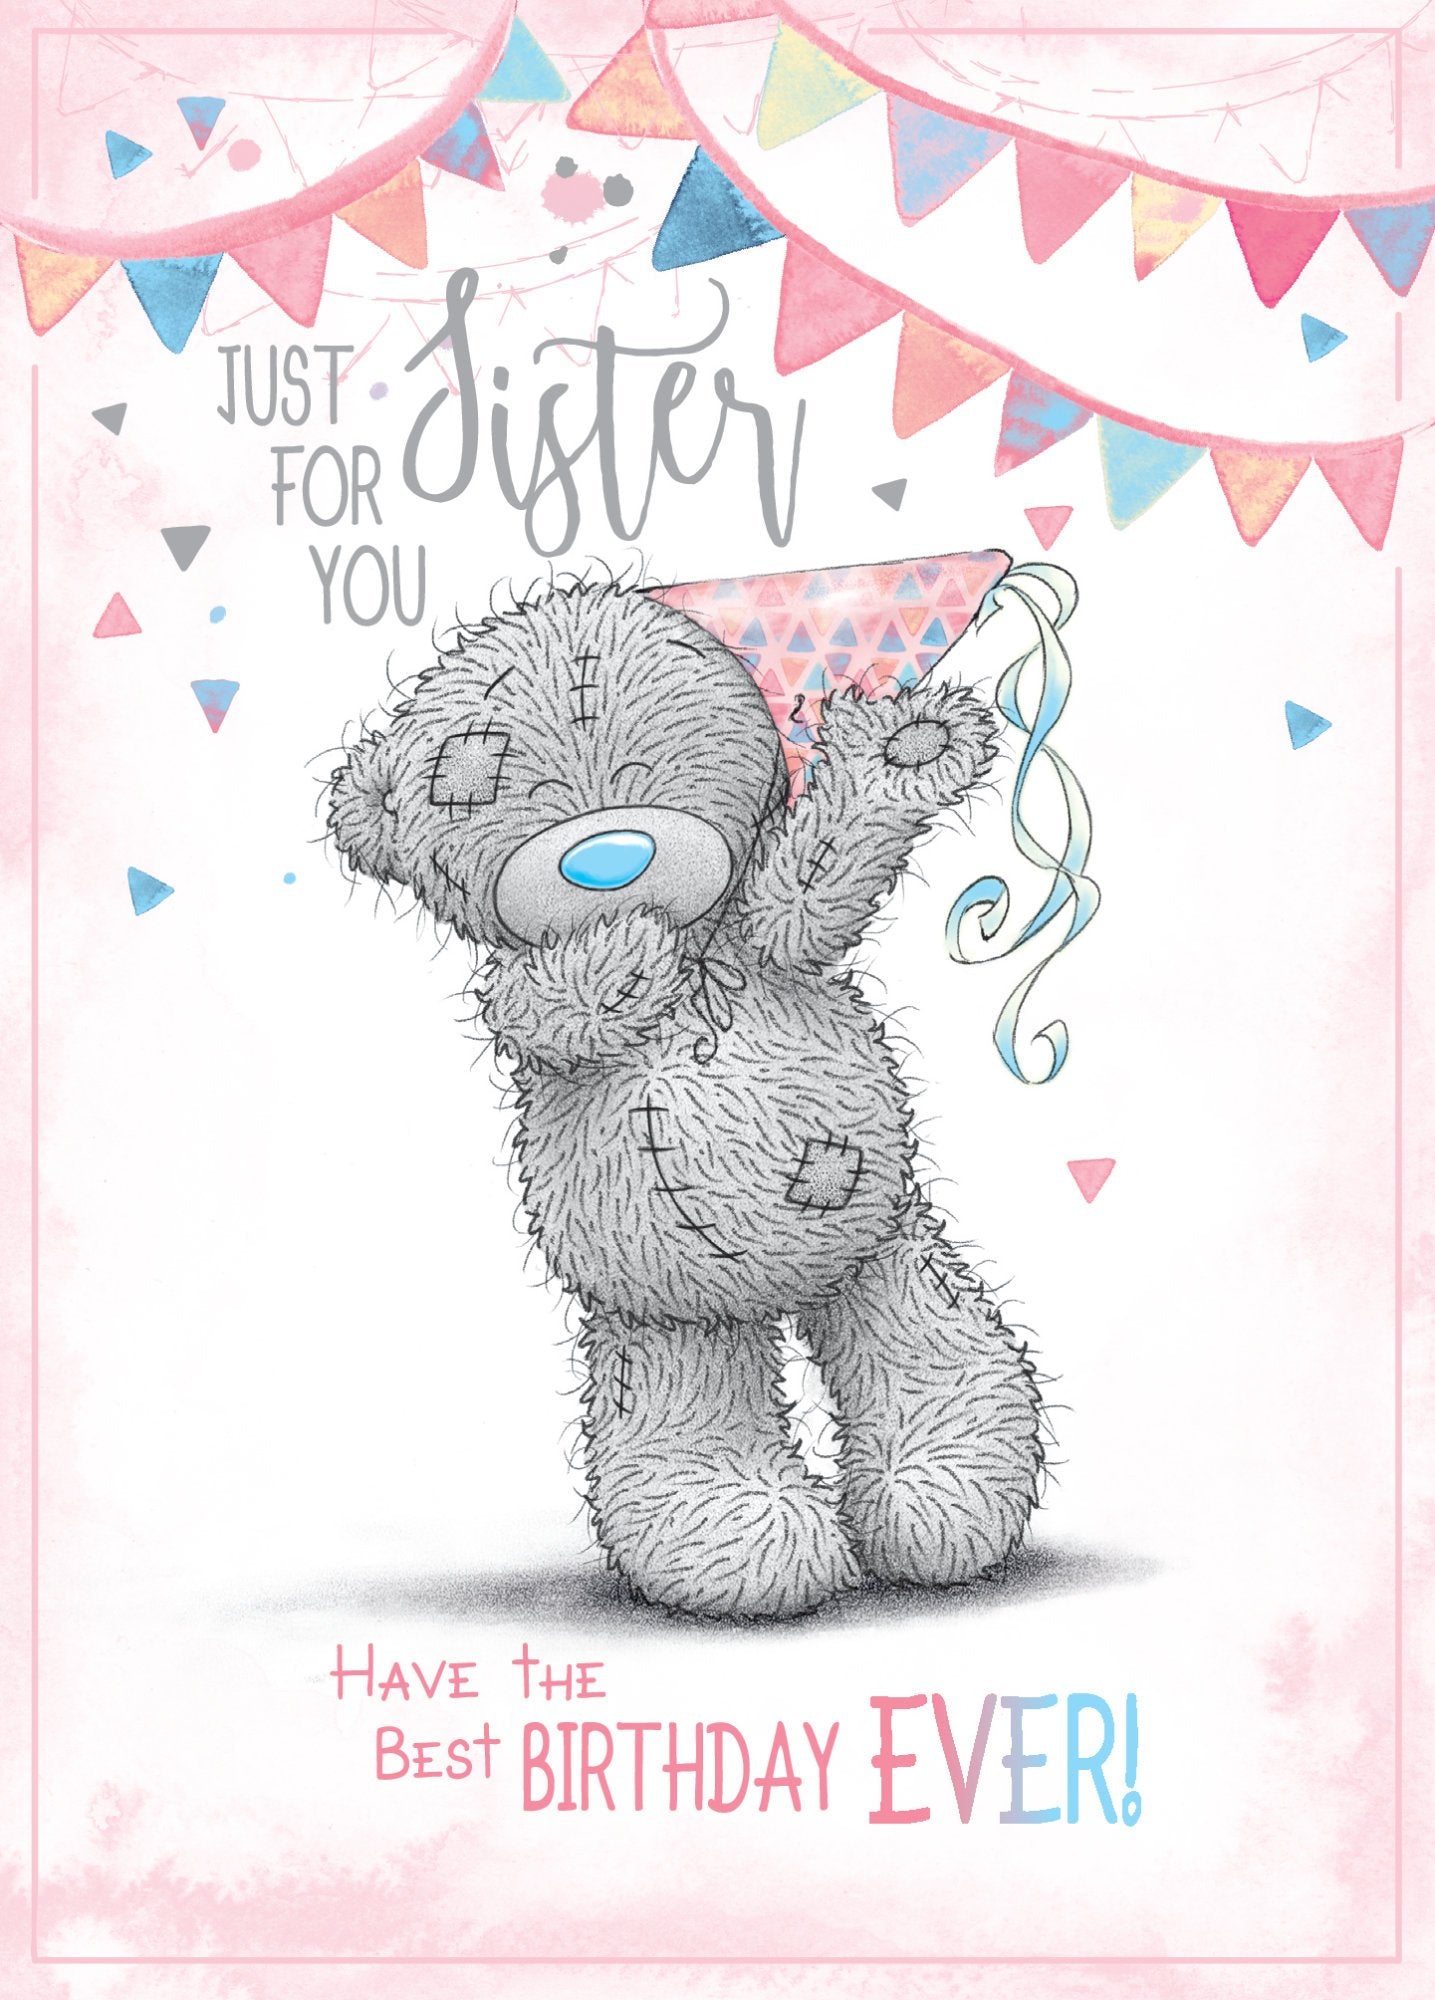 Photograph of Sister Birthday Teddy Hat Greetings Card at Nicole's Shop